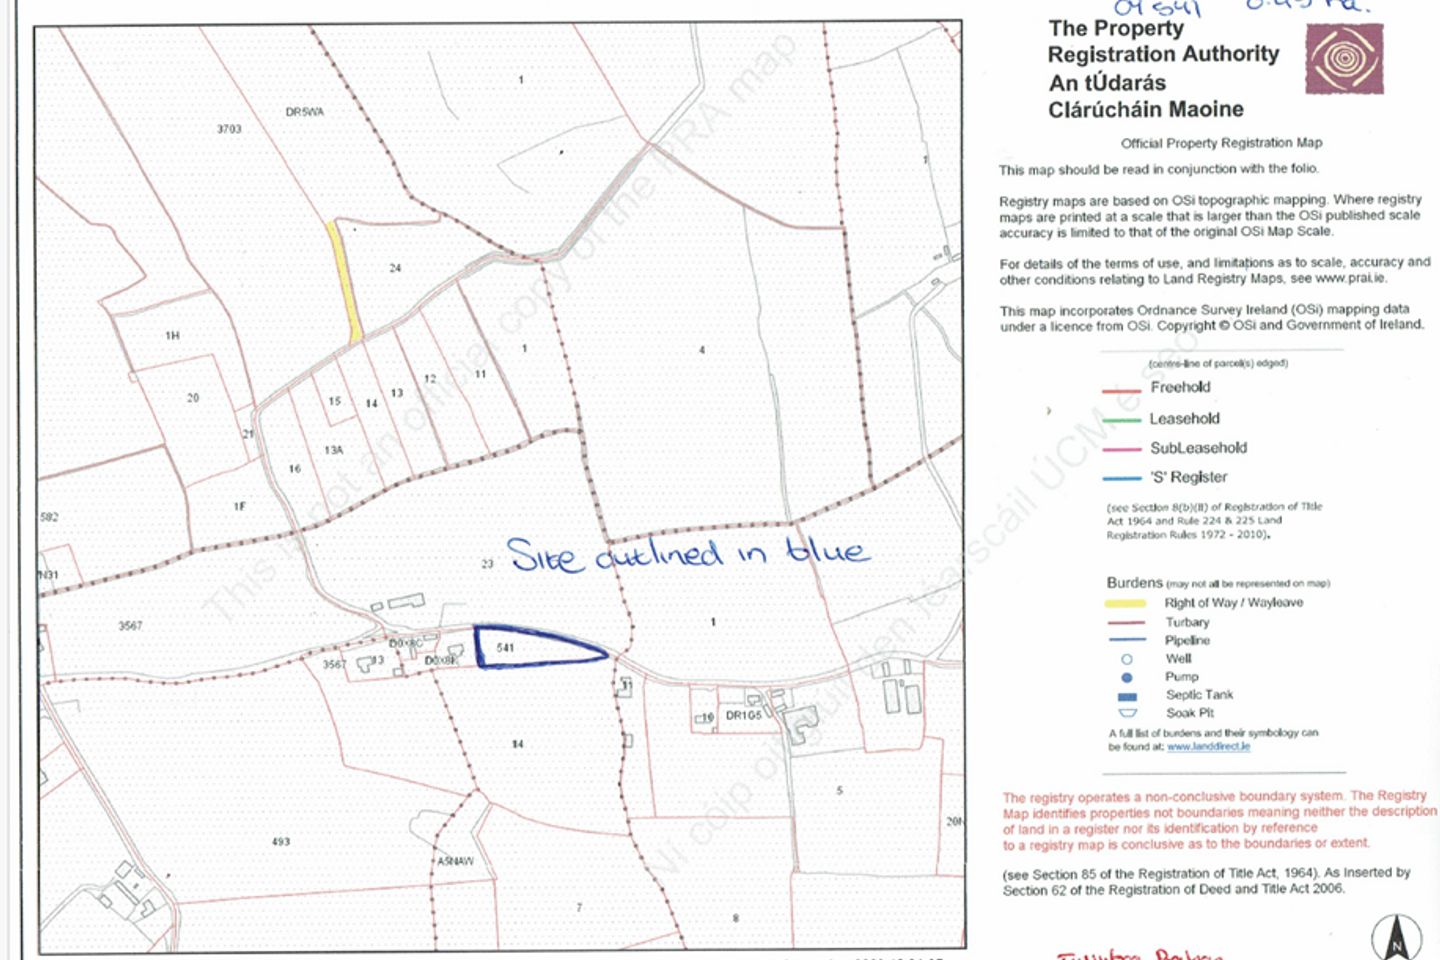 C. 1.11 Acre Site at Tullybeg, Rahan, Co. Offaly